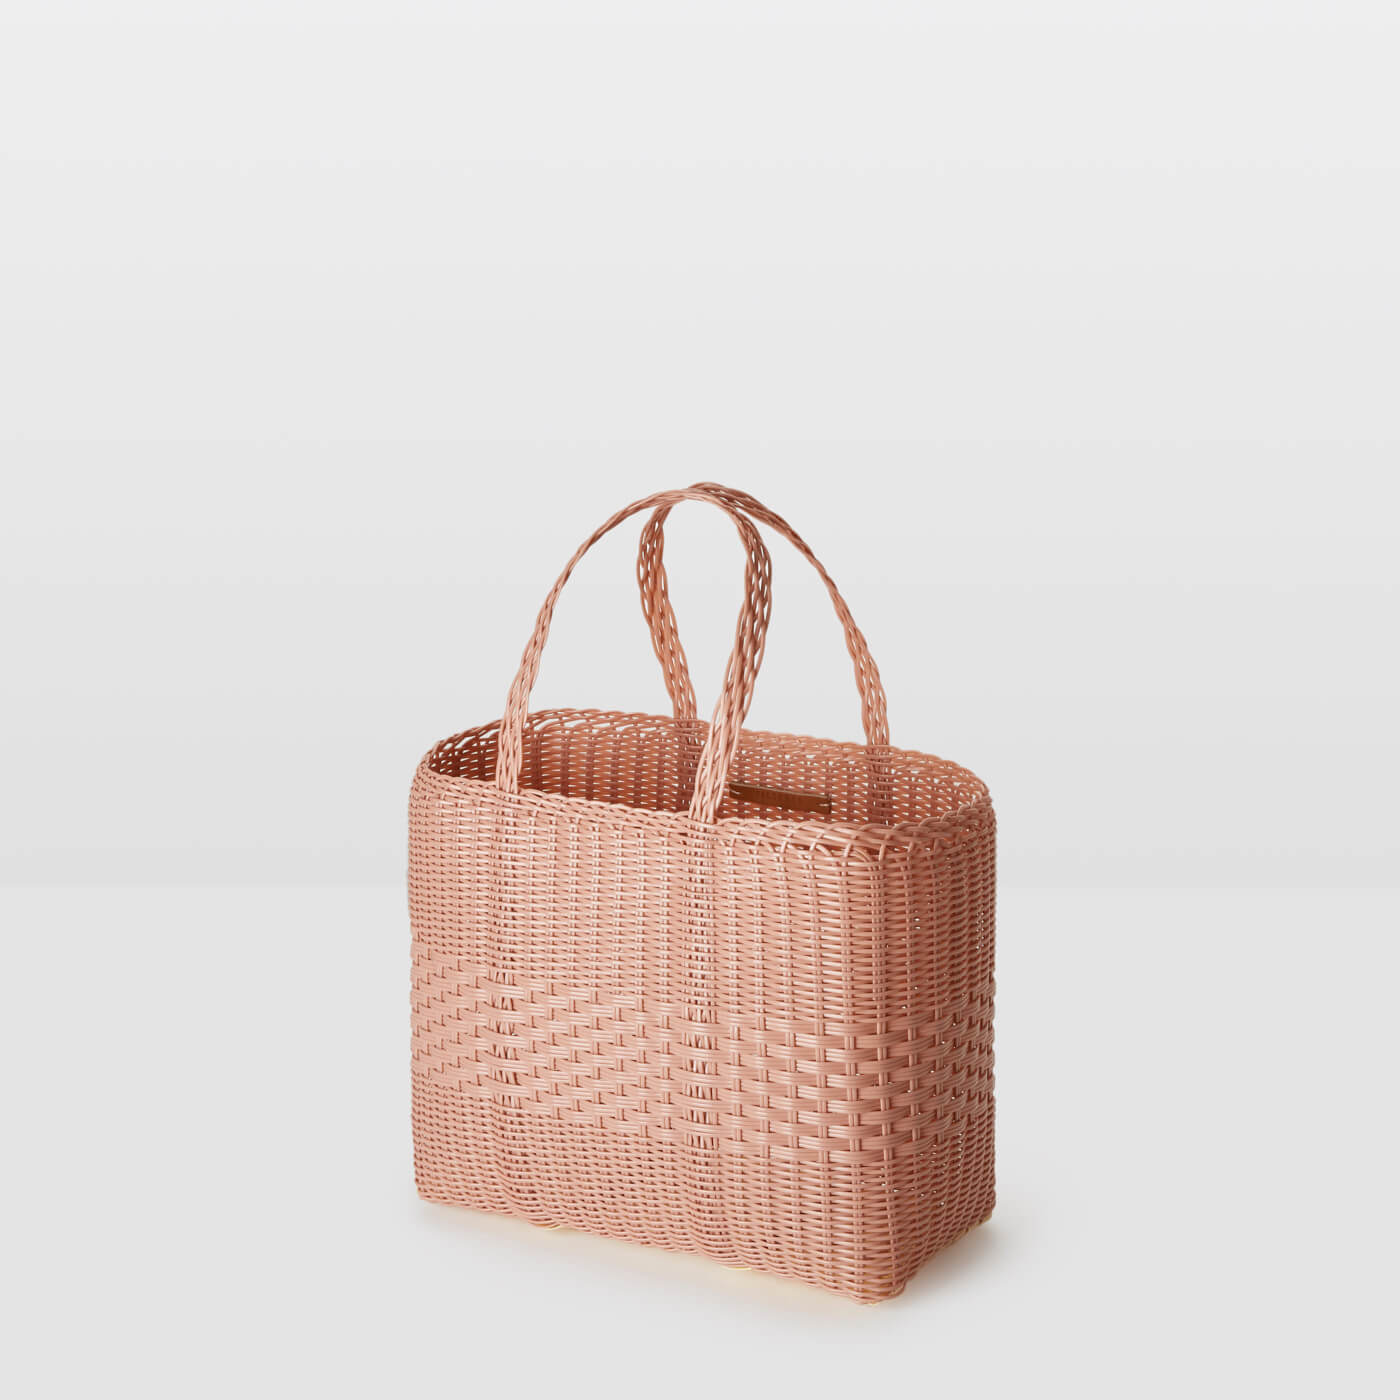 SMALL HANDWOVEN PLASTIC LACE BAG : ROSE